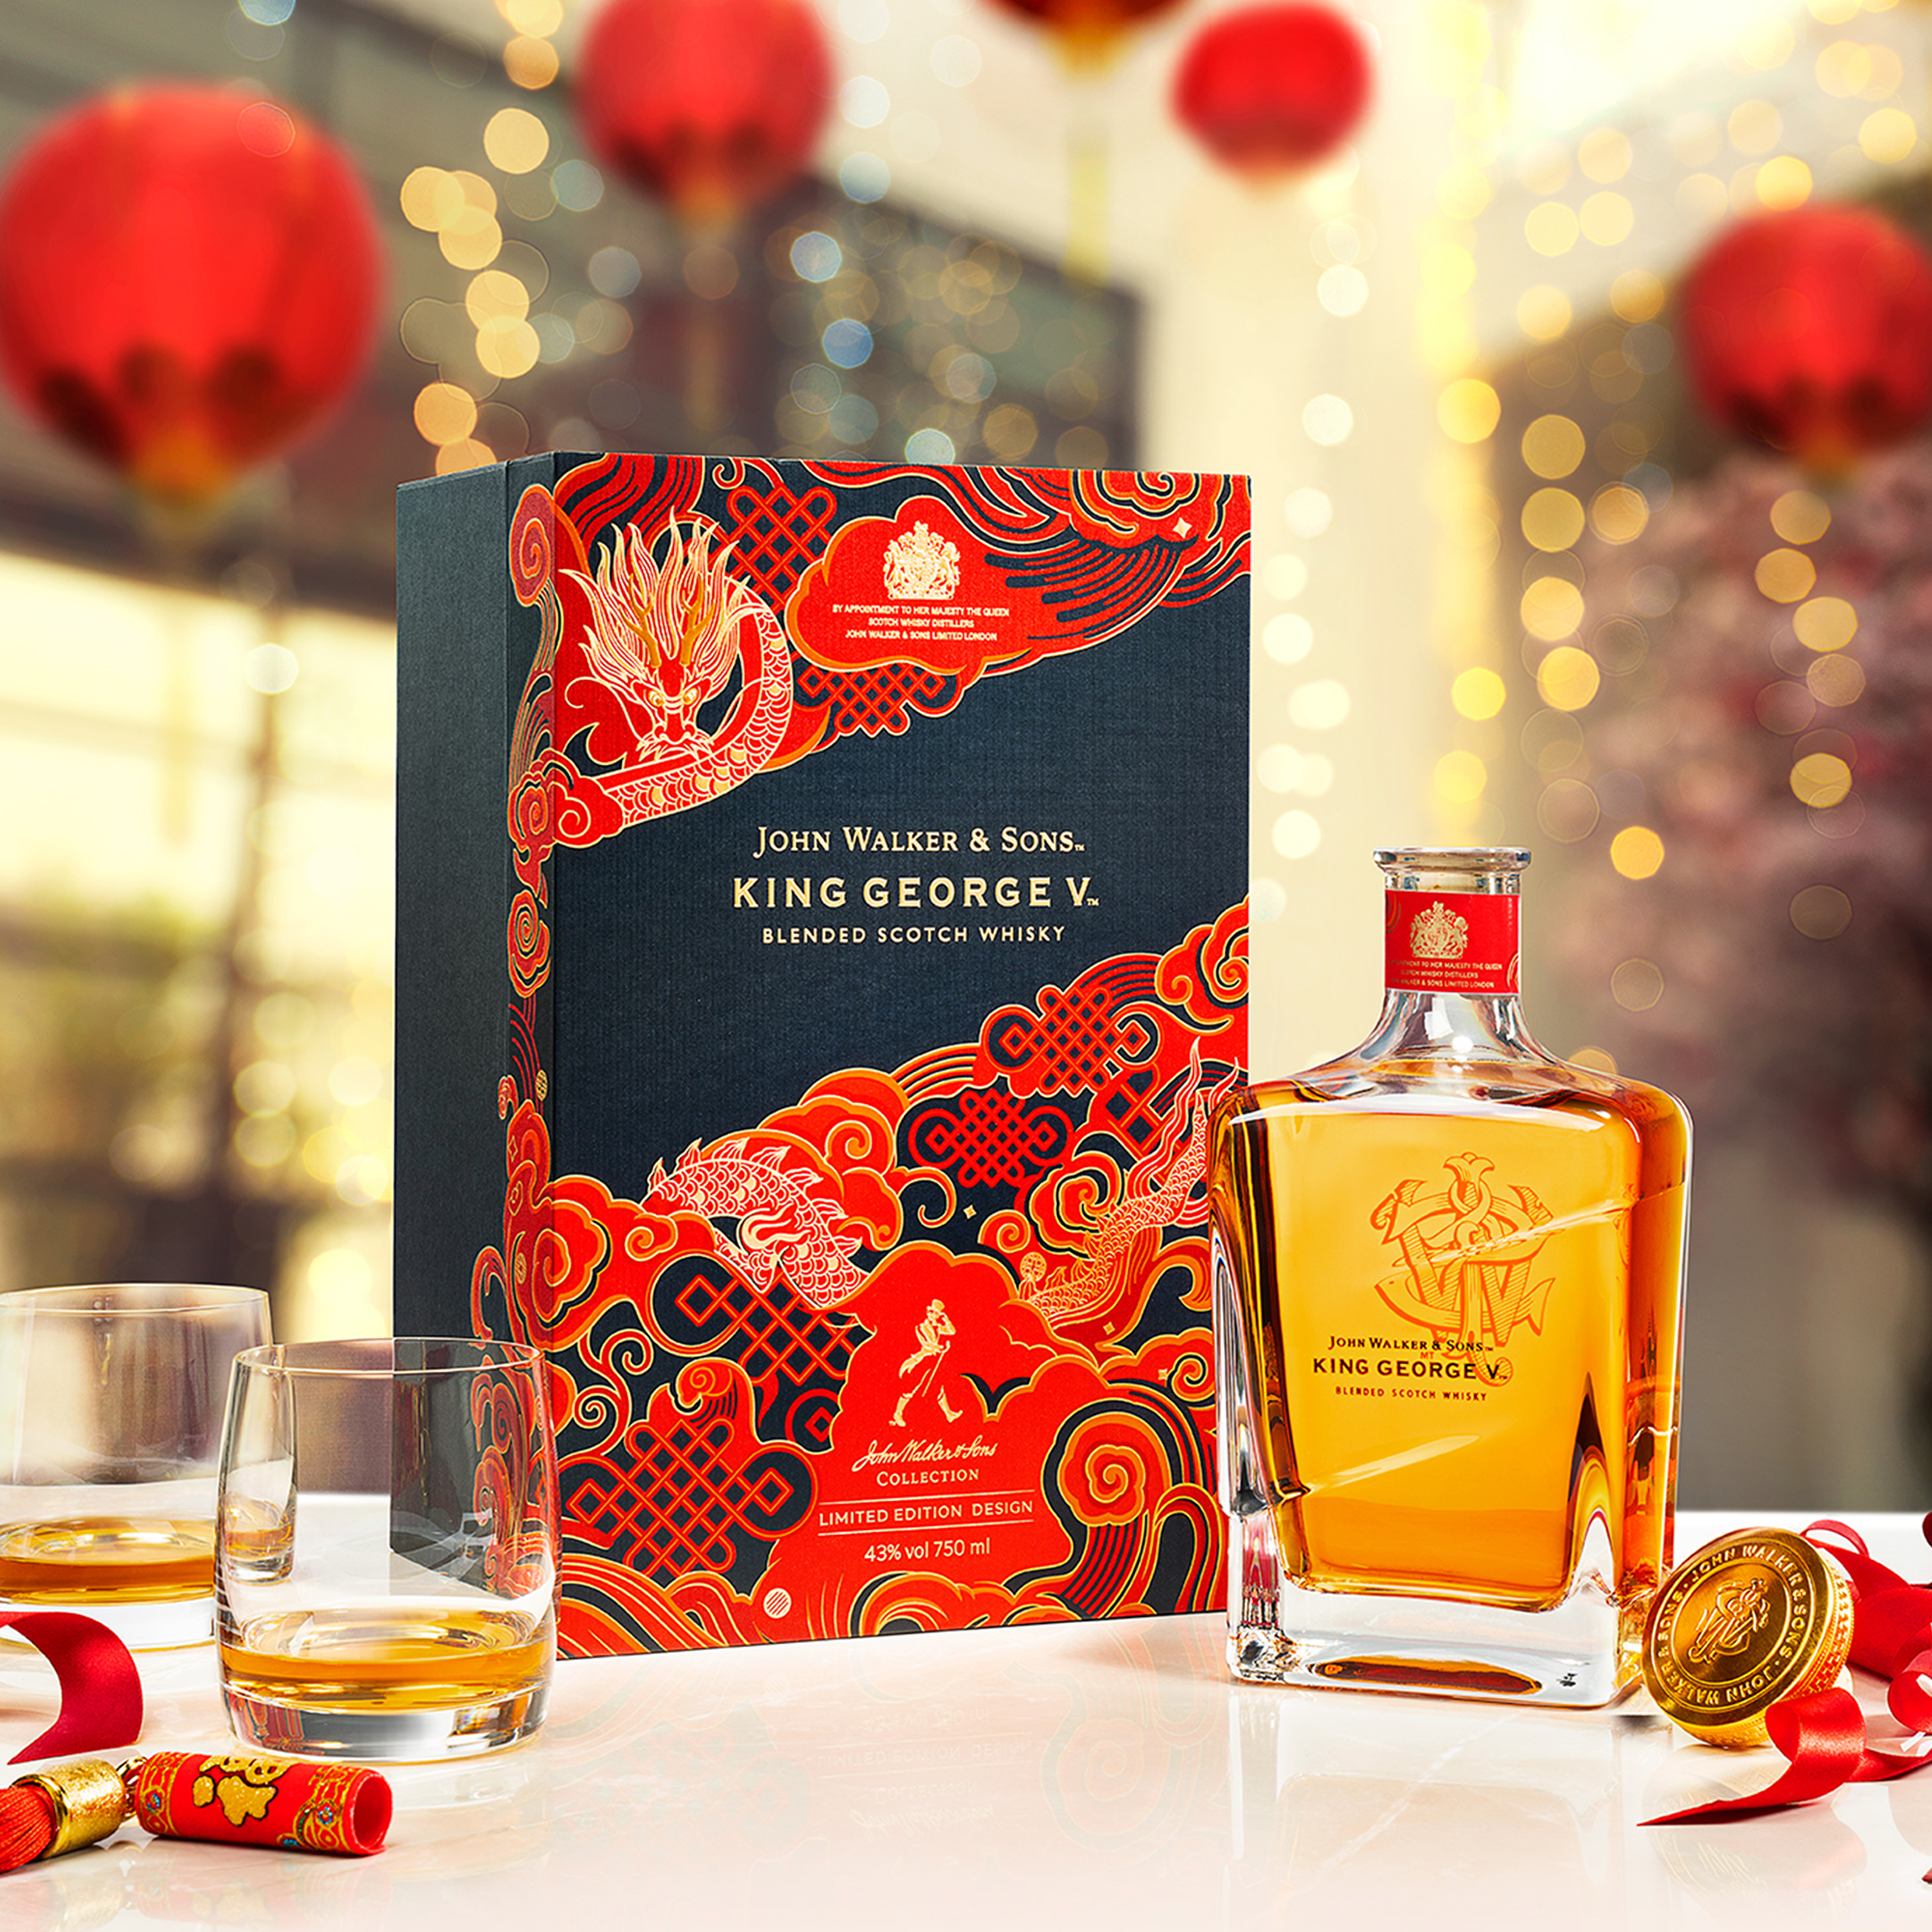 JOHN WALKER & SONS KING GEORGE V FIRST-EVER CHINESE NEW YEAR LIMITED EDITION DESIGN